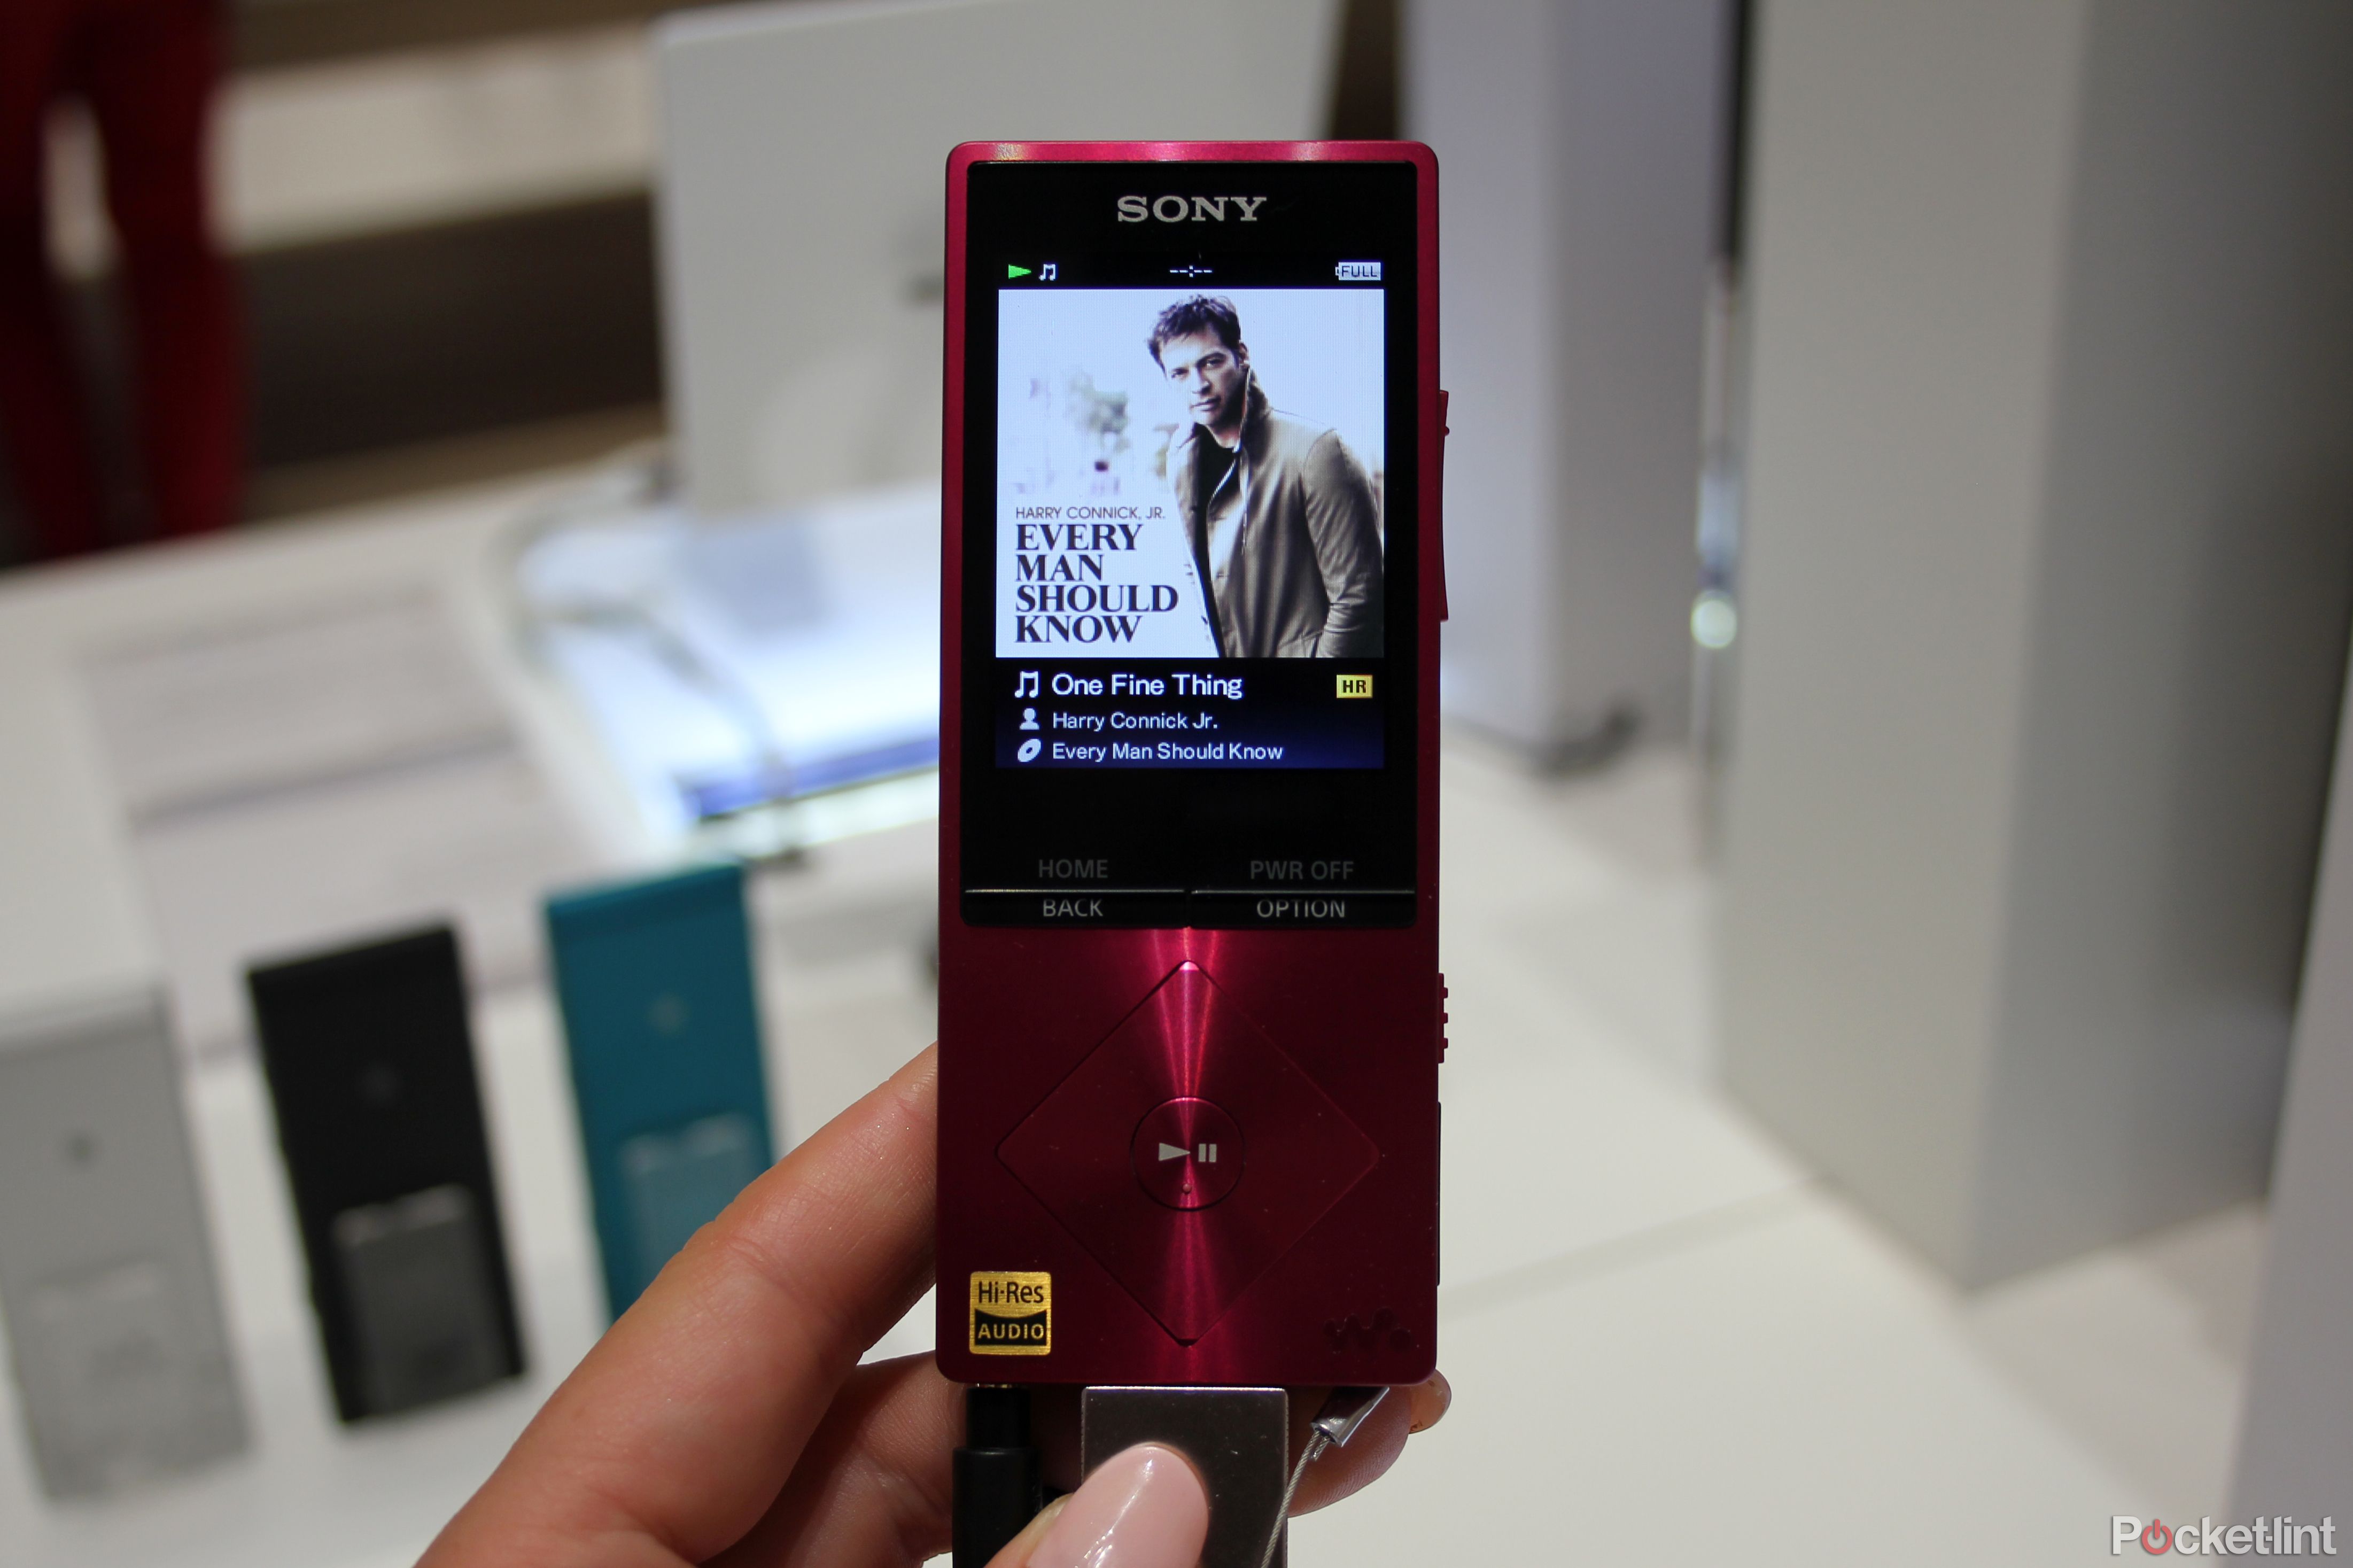 sony nwz a15 walkman is a super cute portable high res music player hands on  image 1